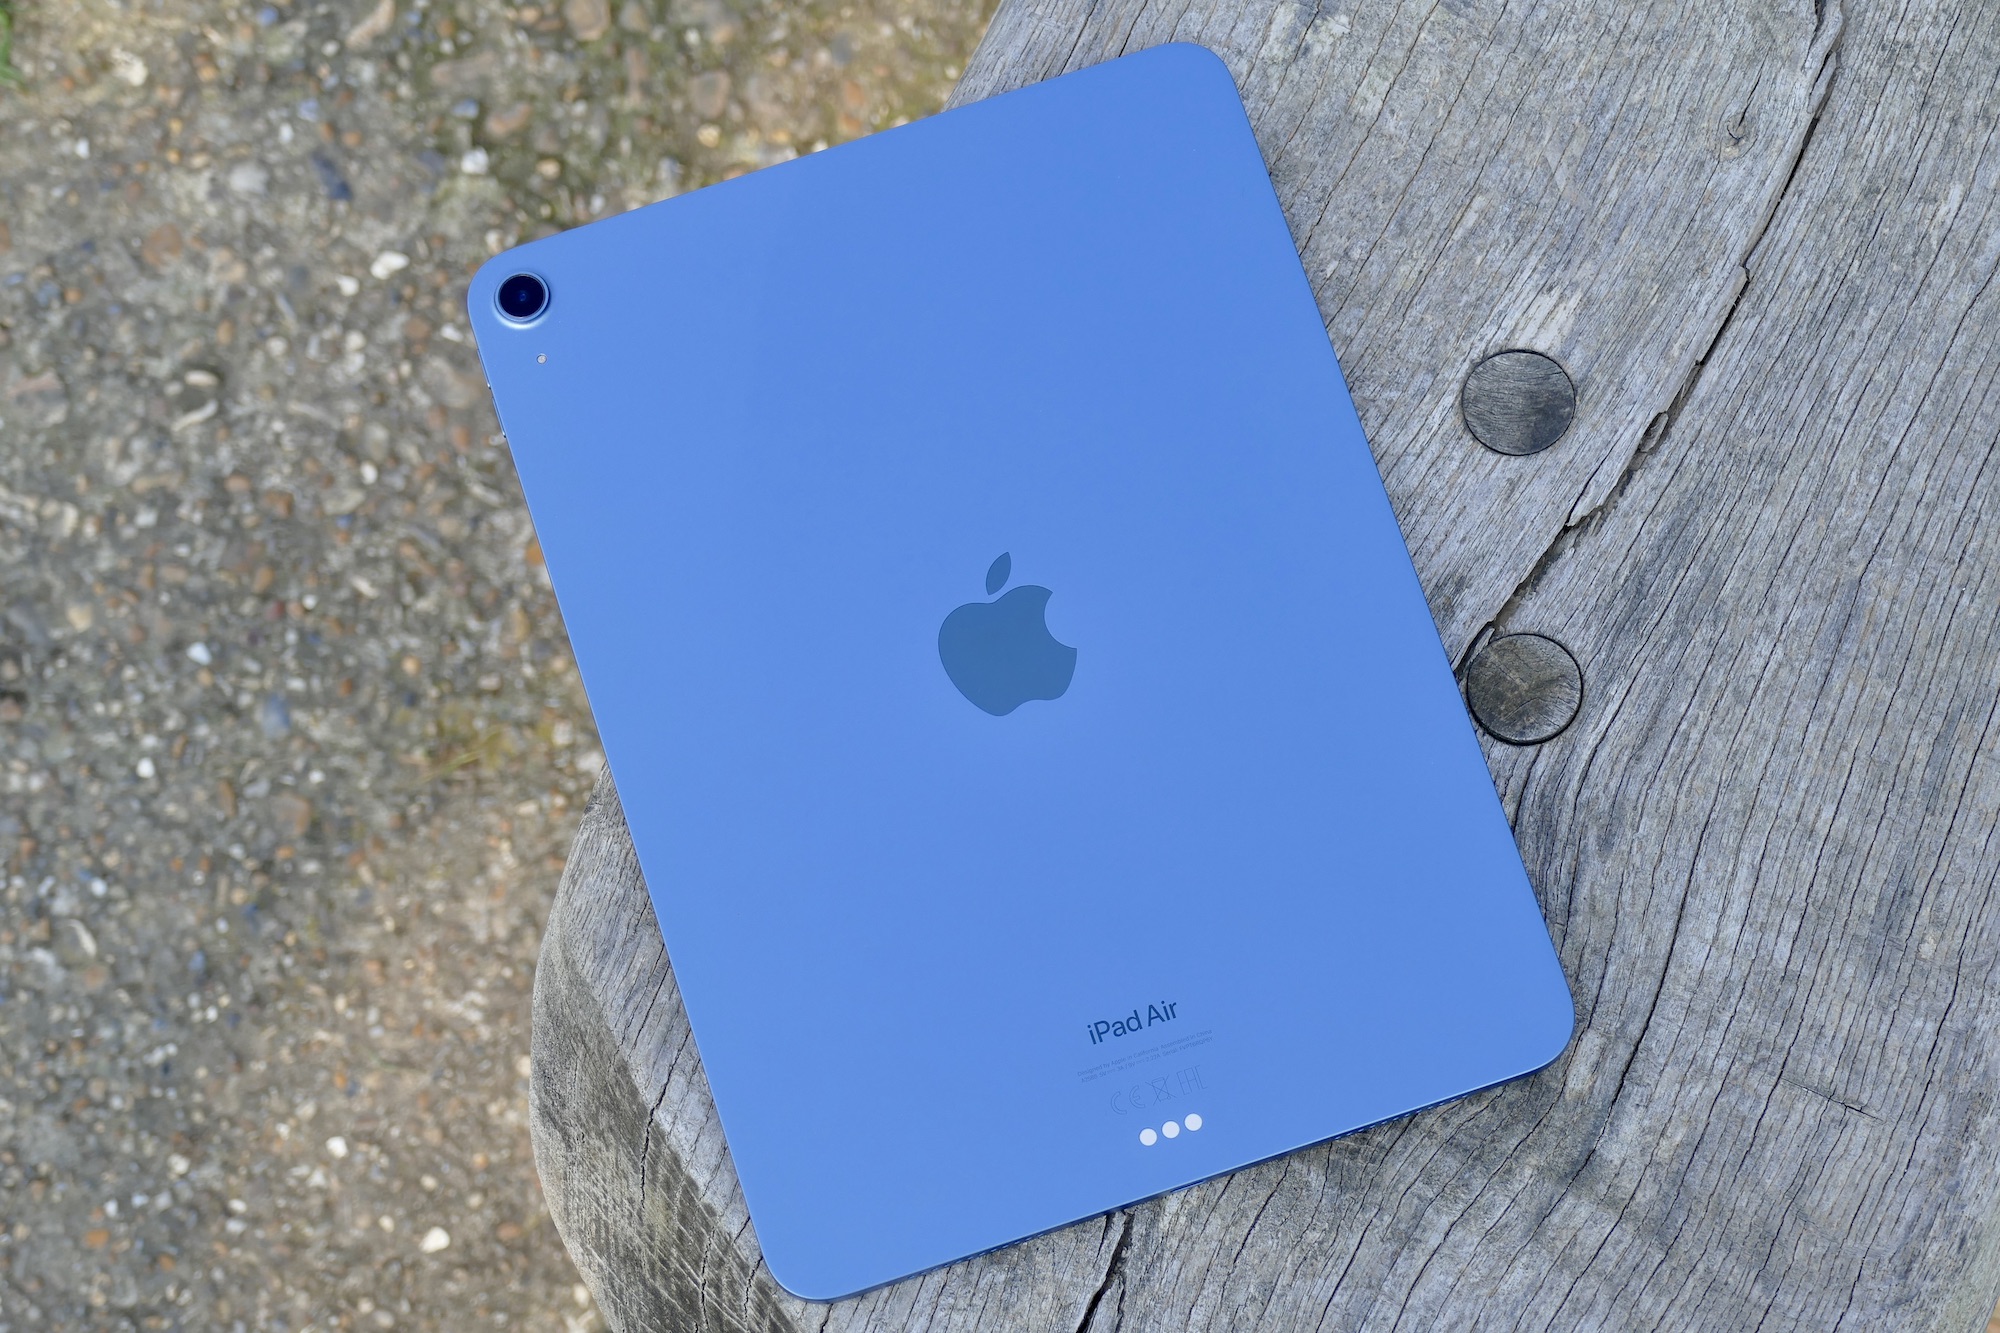 Apple iPad Air (2022) review: Almost everything you want